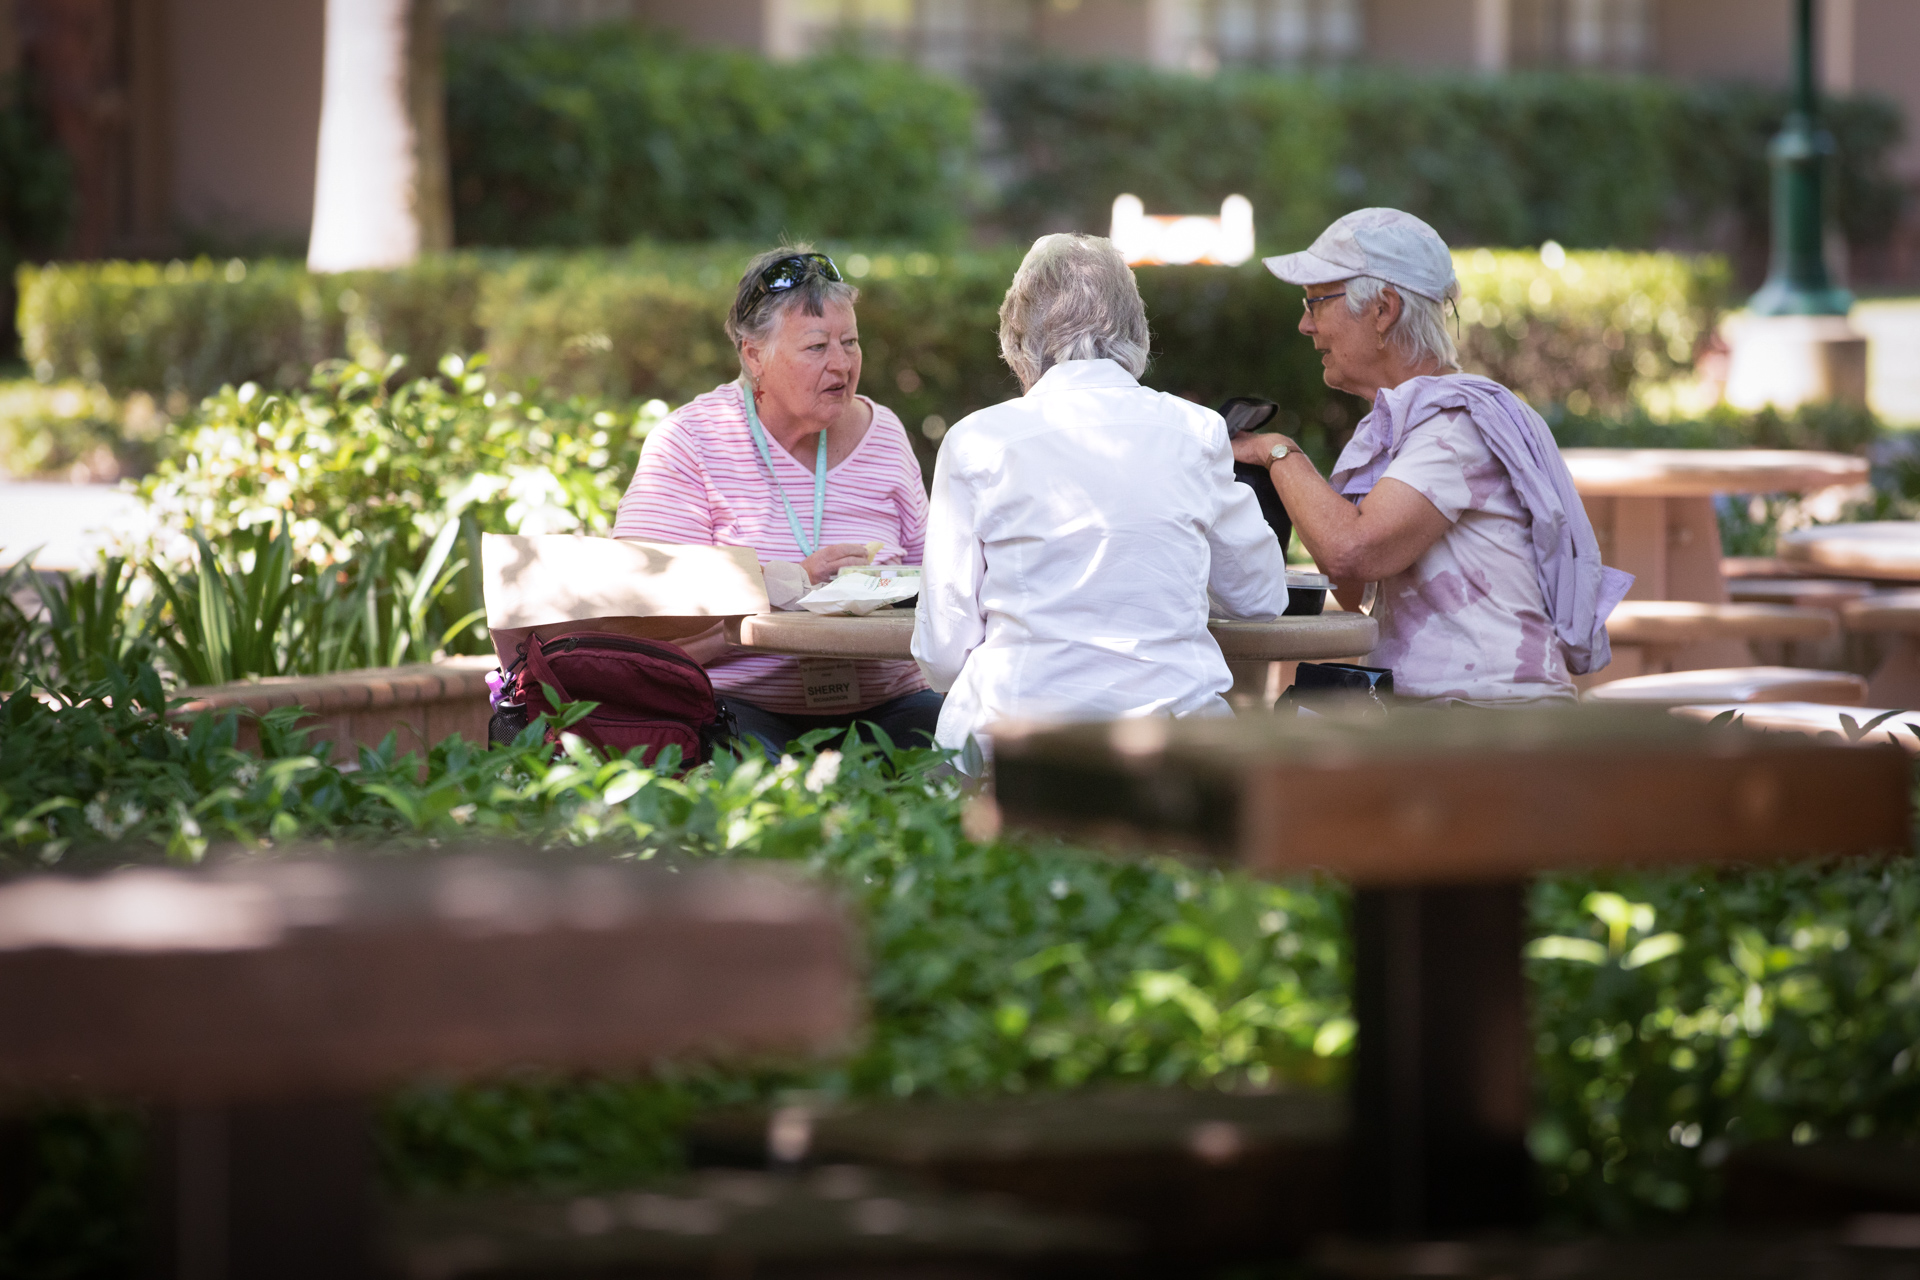 Members of the Renaissance Society have a conversation at an outdoor table at Sac State.